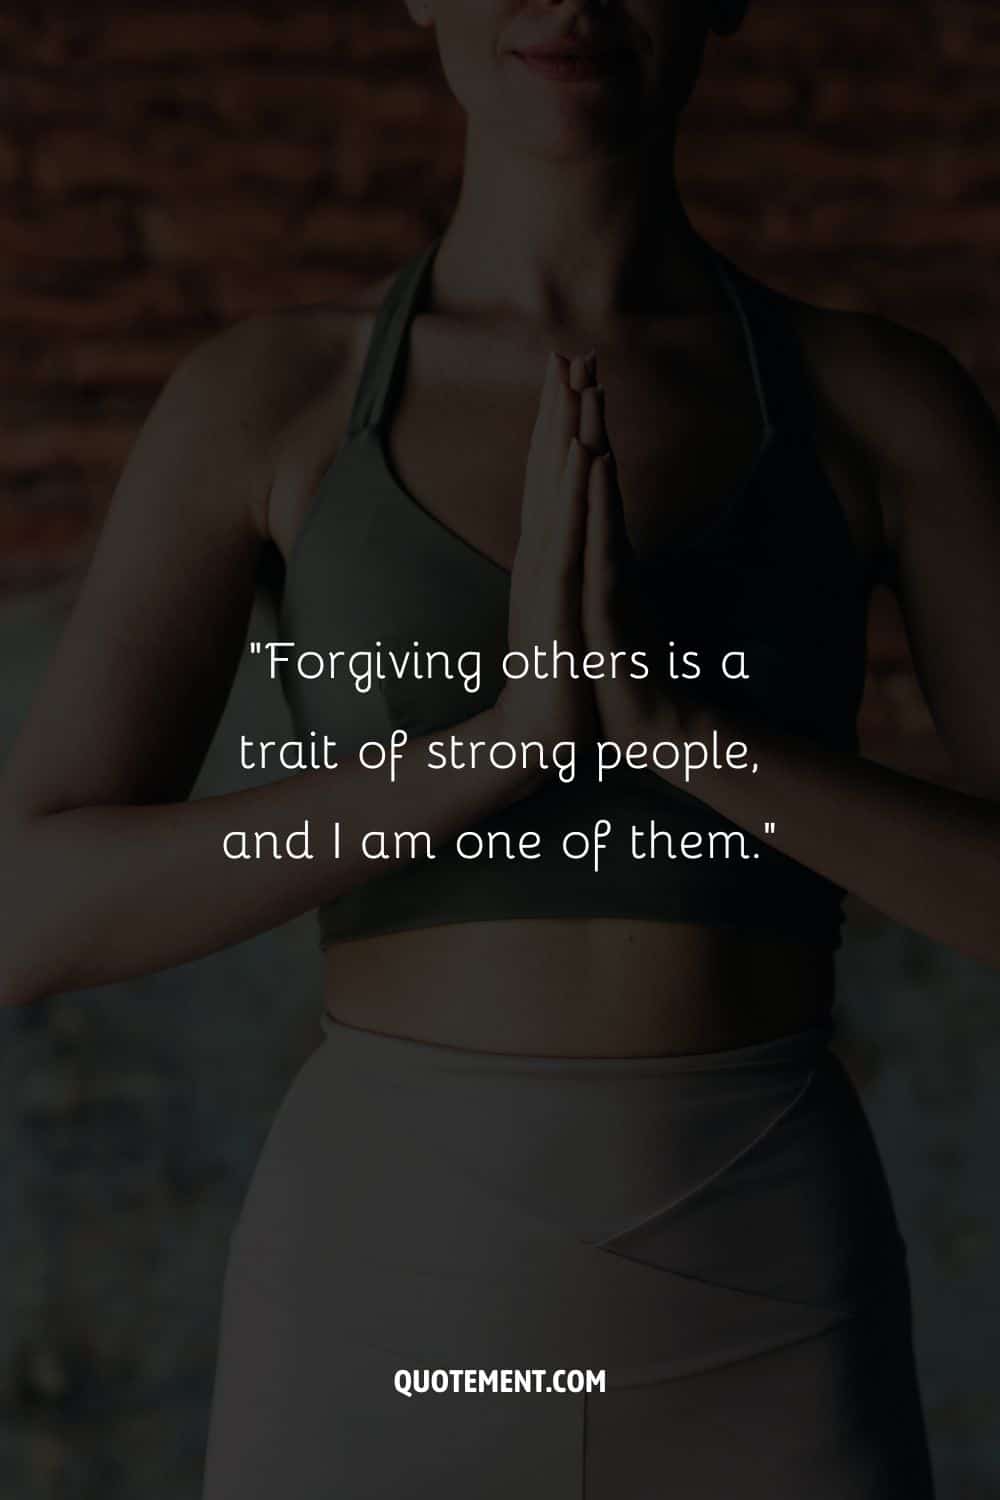 Forgiving others is a trait of strong people, and I am one of them